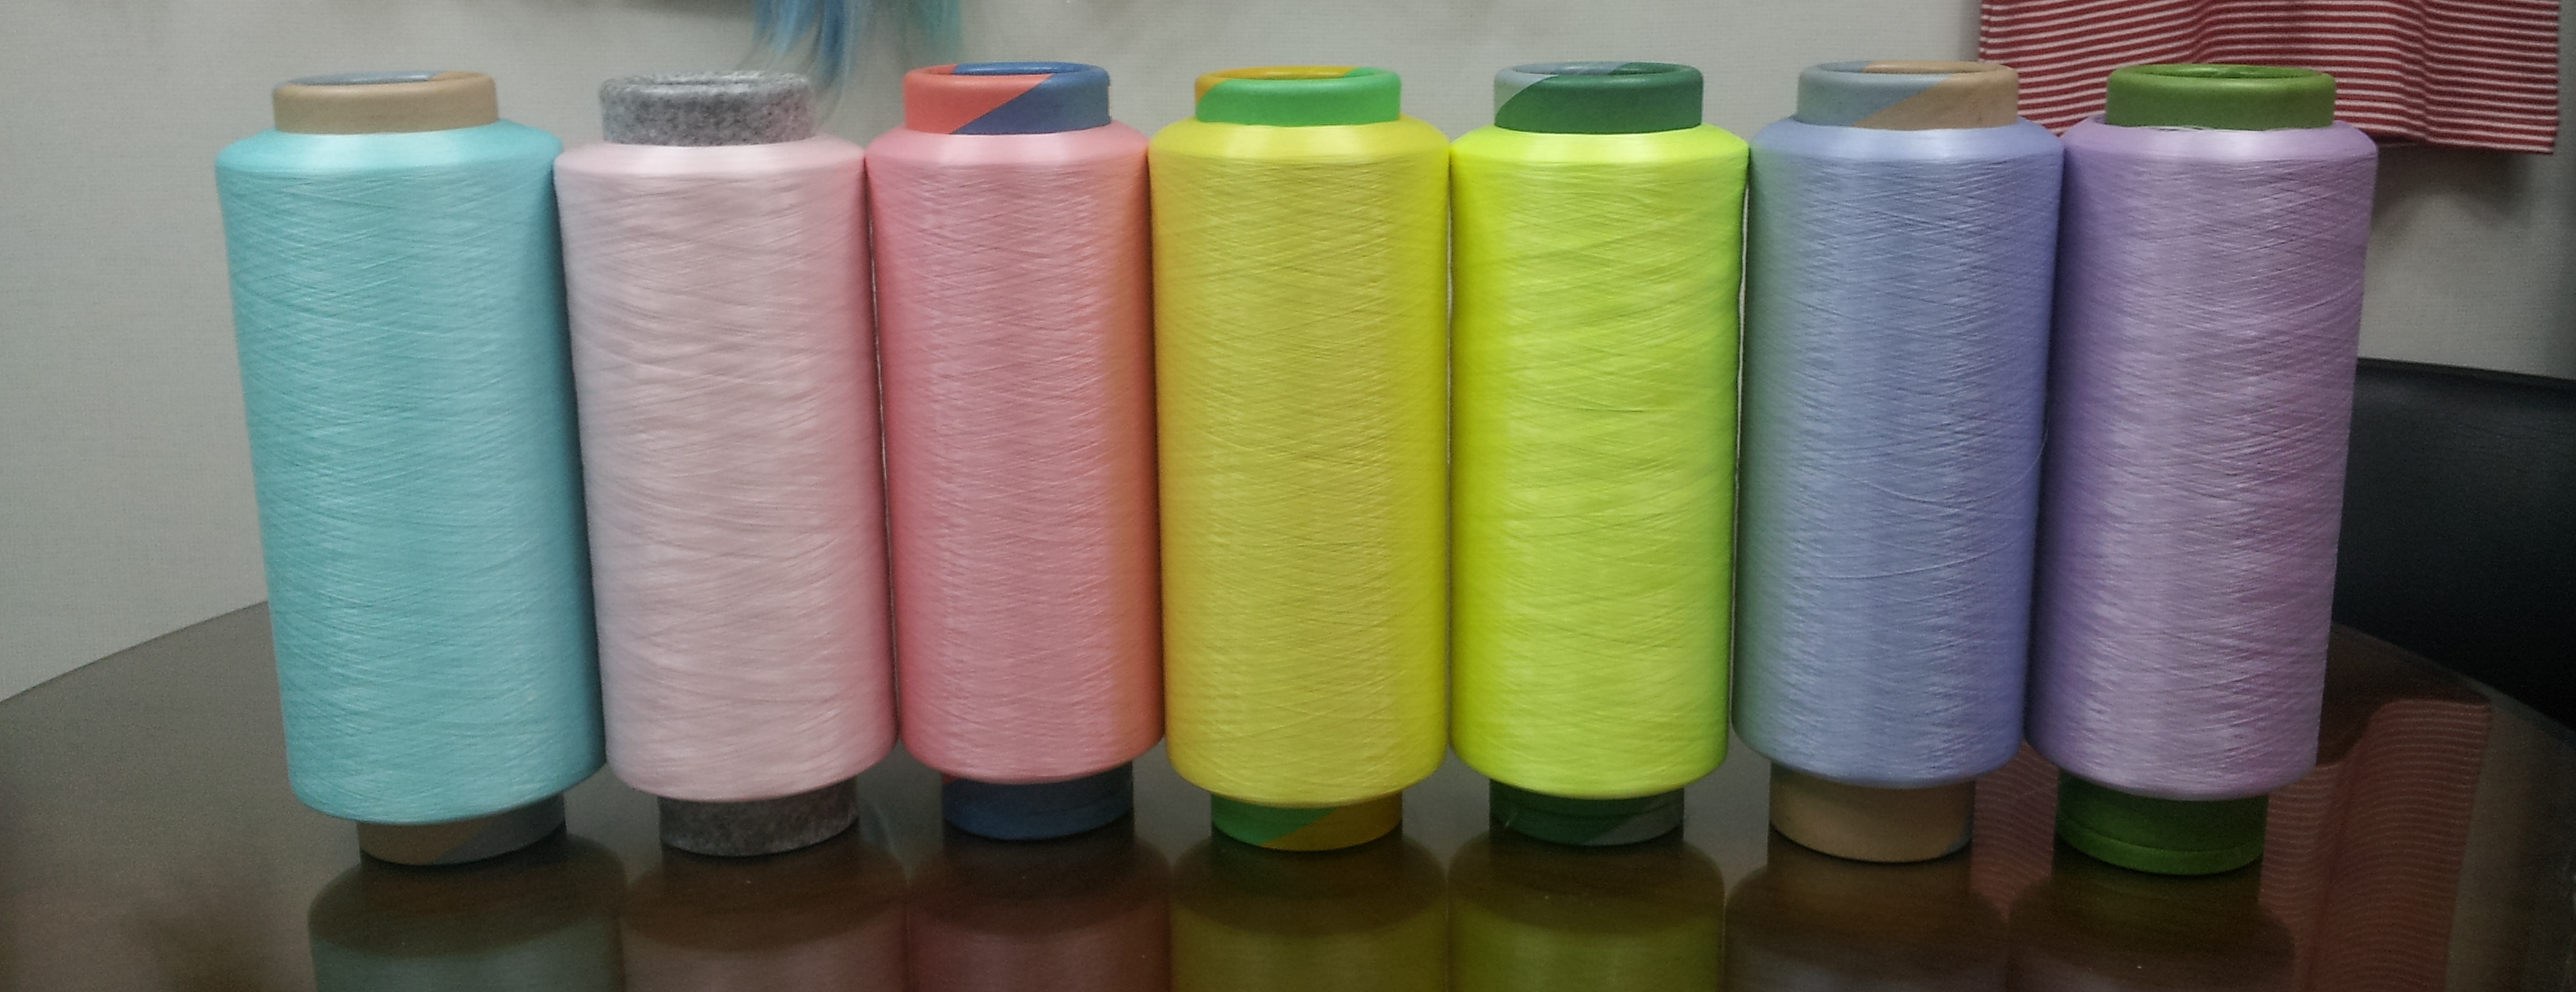 Glow Yarn for luminescent effects in textiles from Swicofil